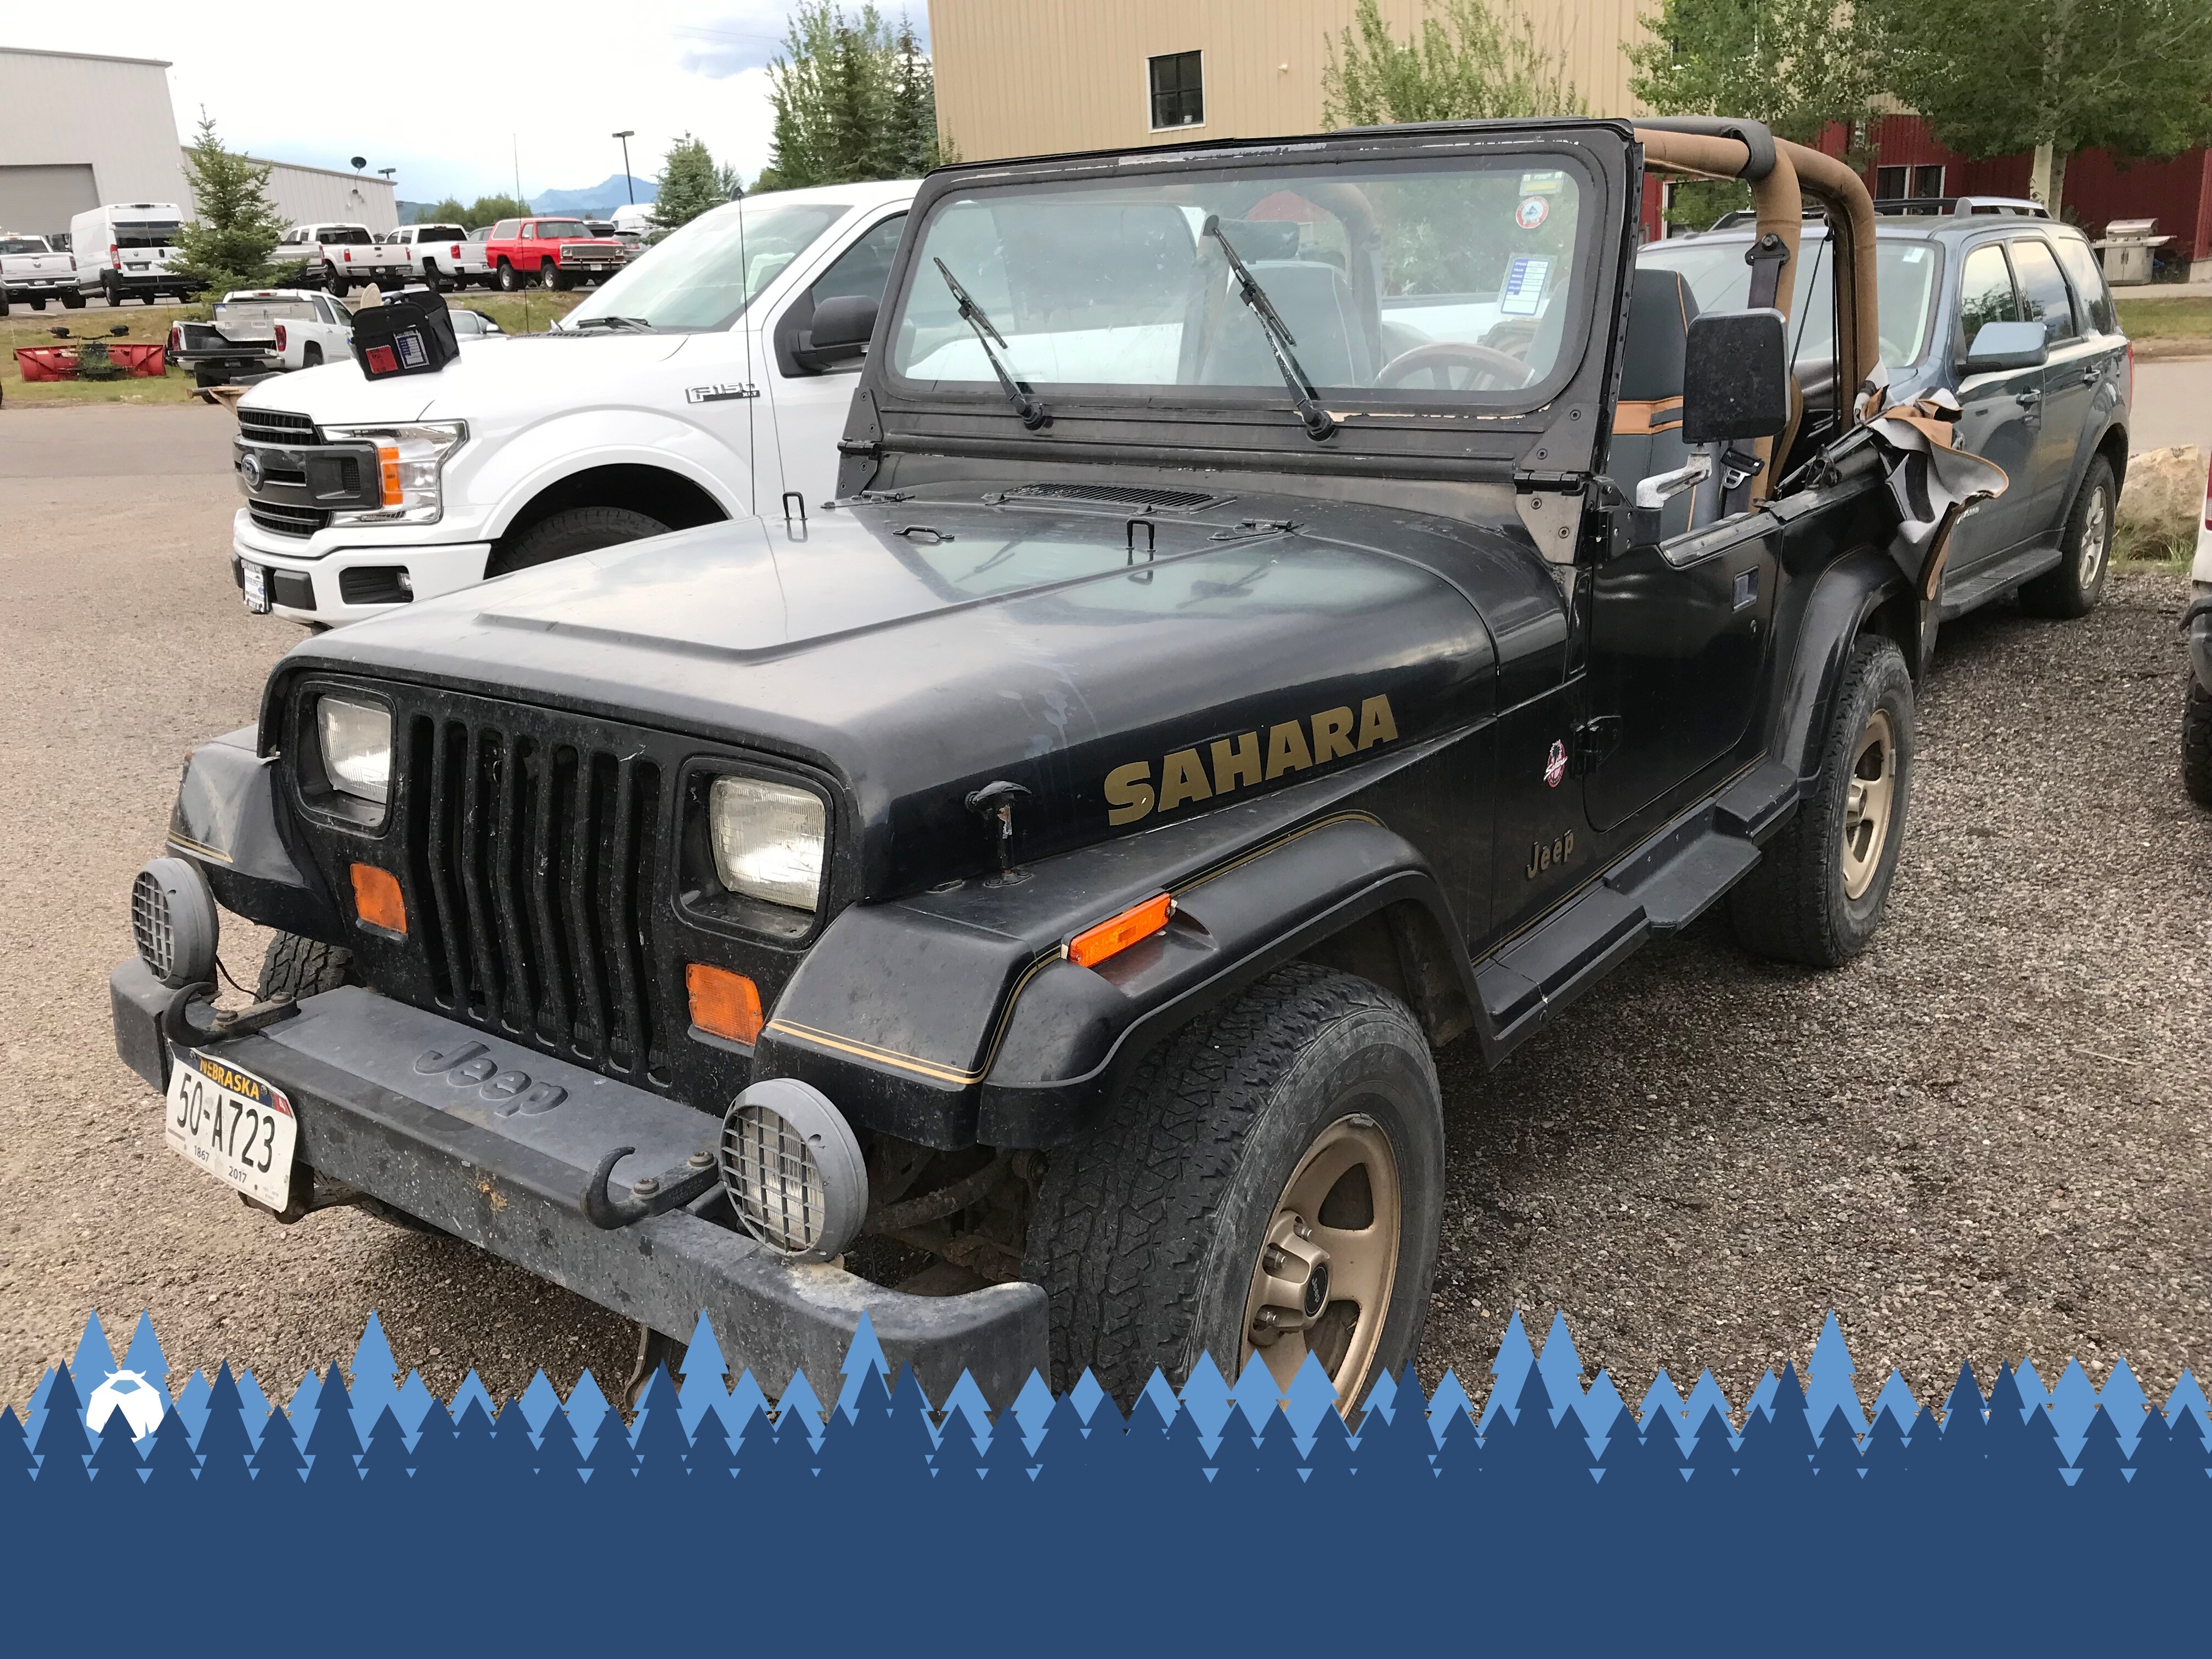 1985 to 1995 Jeep Wrangler For Sale in Longmont, CO from $499 to $3,980,000